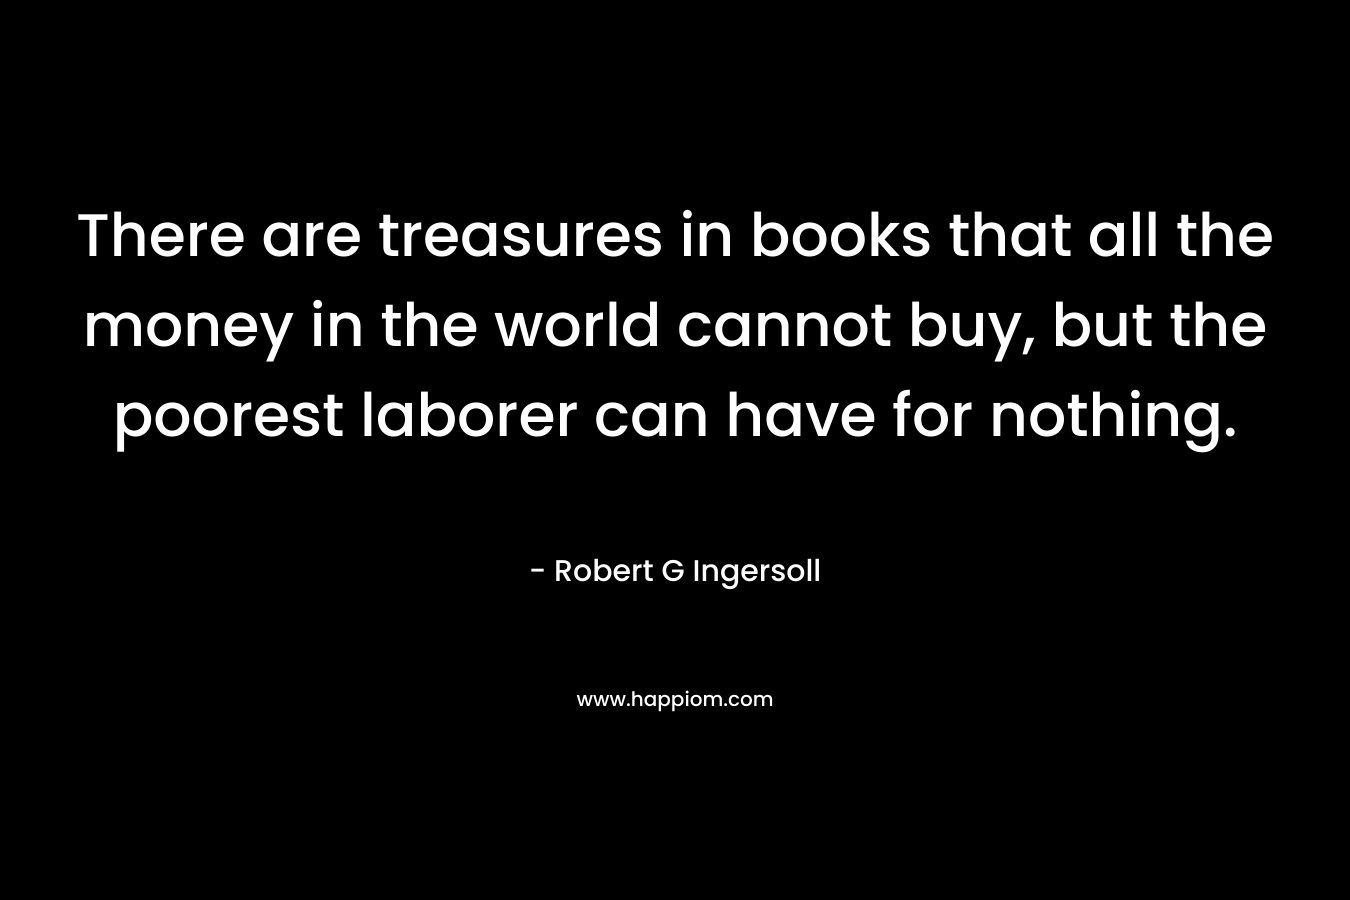 There are treasures in books that all the money in the world cannot buy, but the poorest laborer can have for nothing.